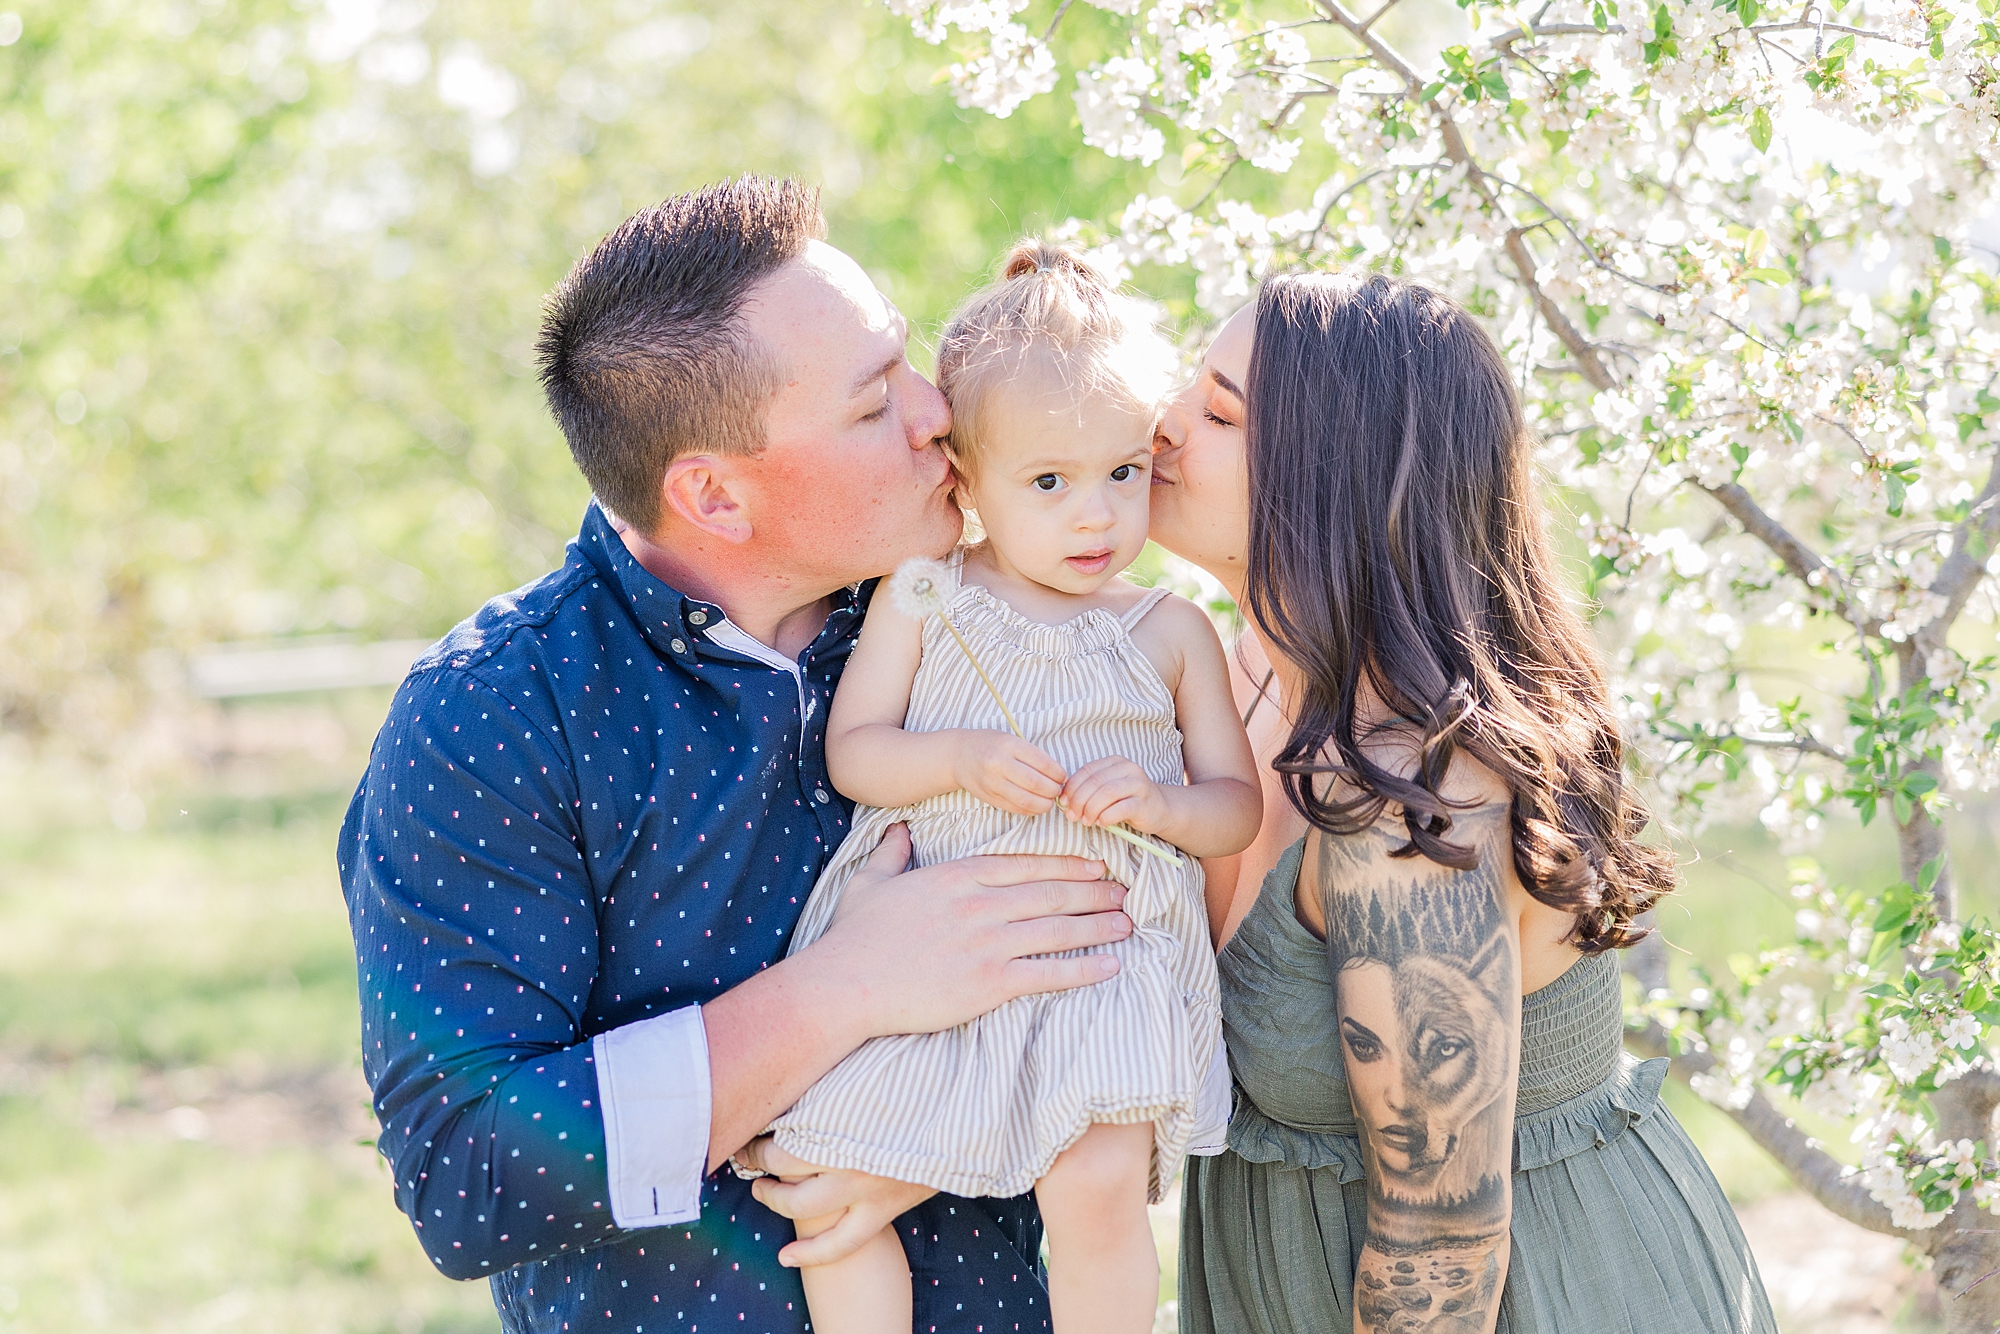 parents kiss their baby girl on the cheek